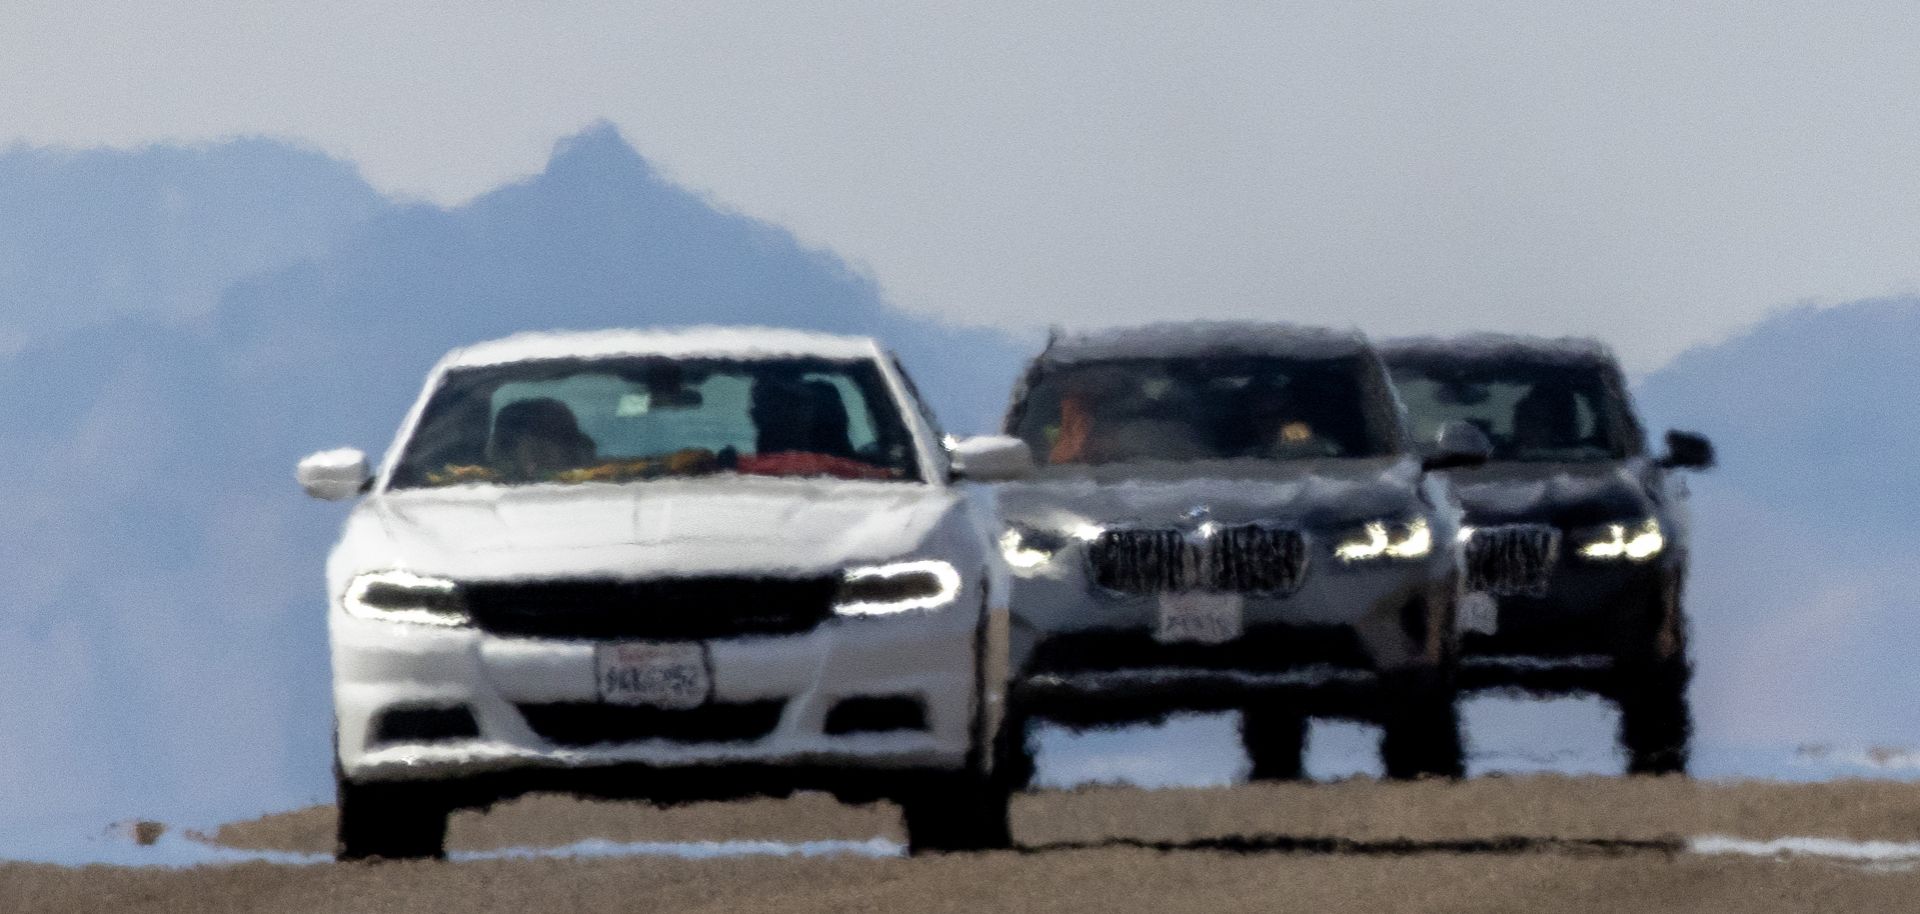 Cars shimmer in the heat haze near Death Valley National Park in California on July 16, 2023, a day that saw temperatures rise past about 127 degrees Fahrenheit. The highest temperature reliably recorded on Earth was 129.2 F in Death Valley in 2013. 